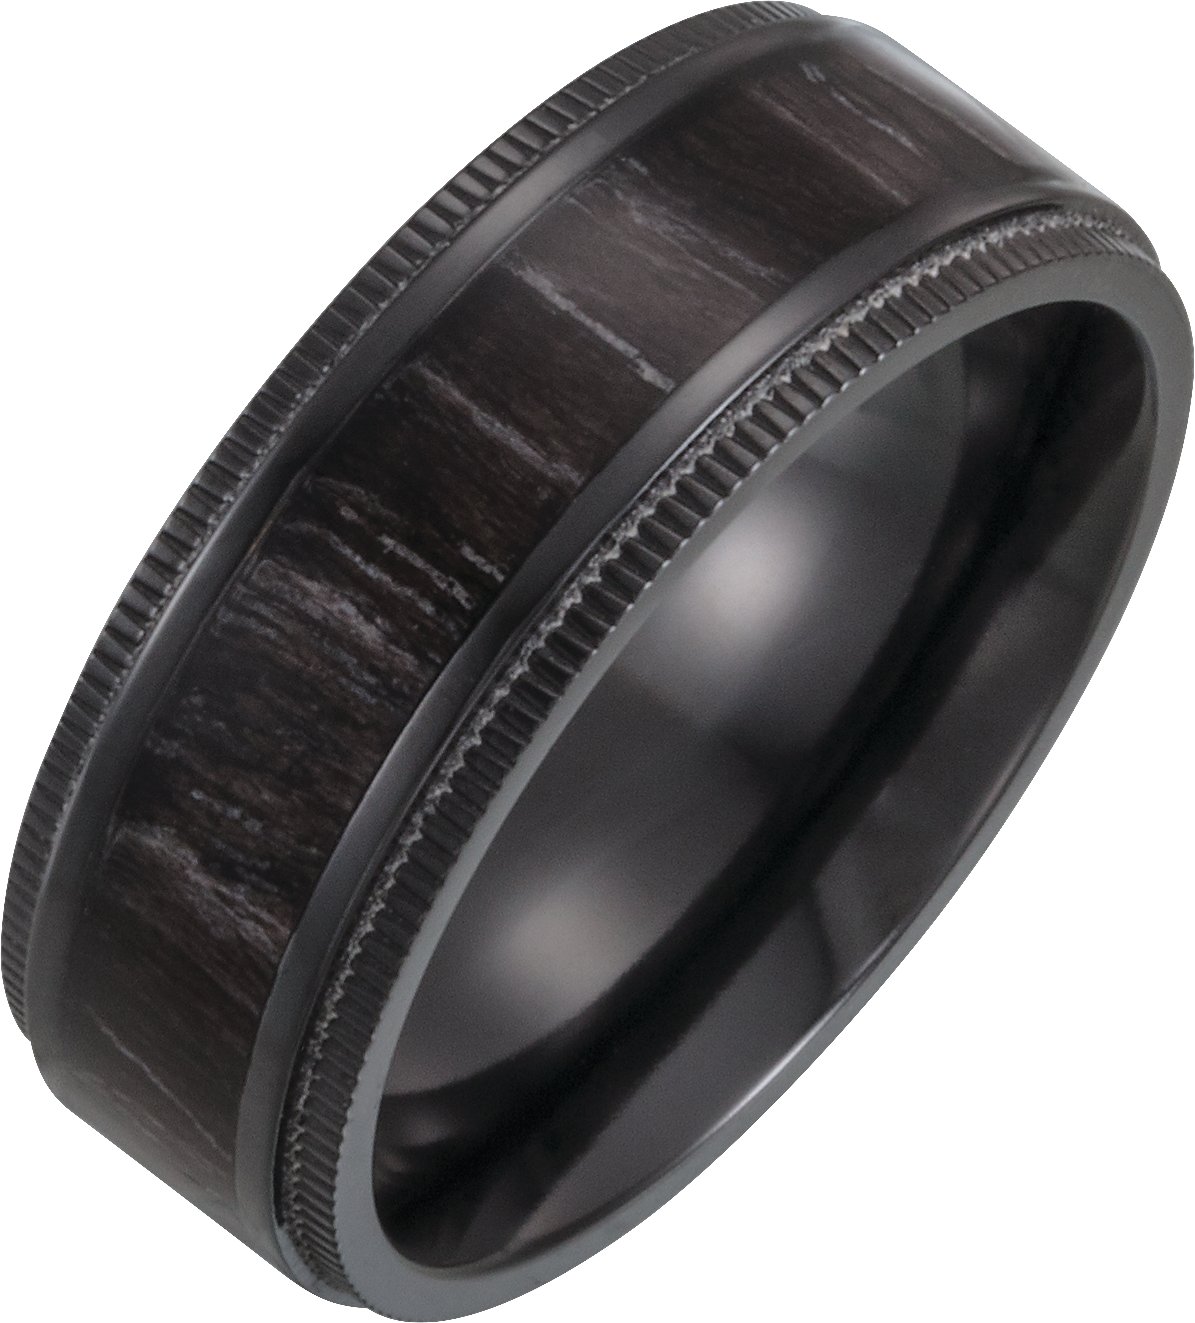 Black Titanium 8 mm Coin-Edge Band with Wood Inlay Size 9